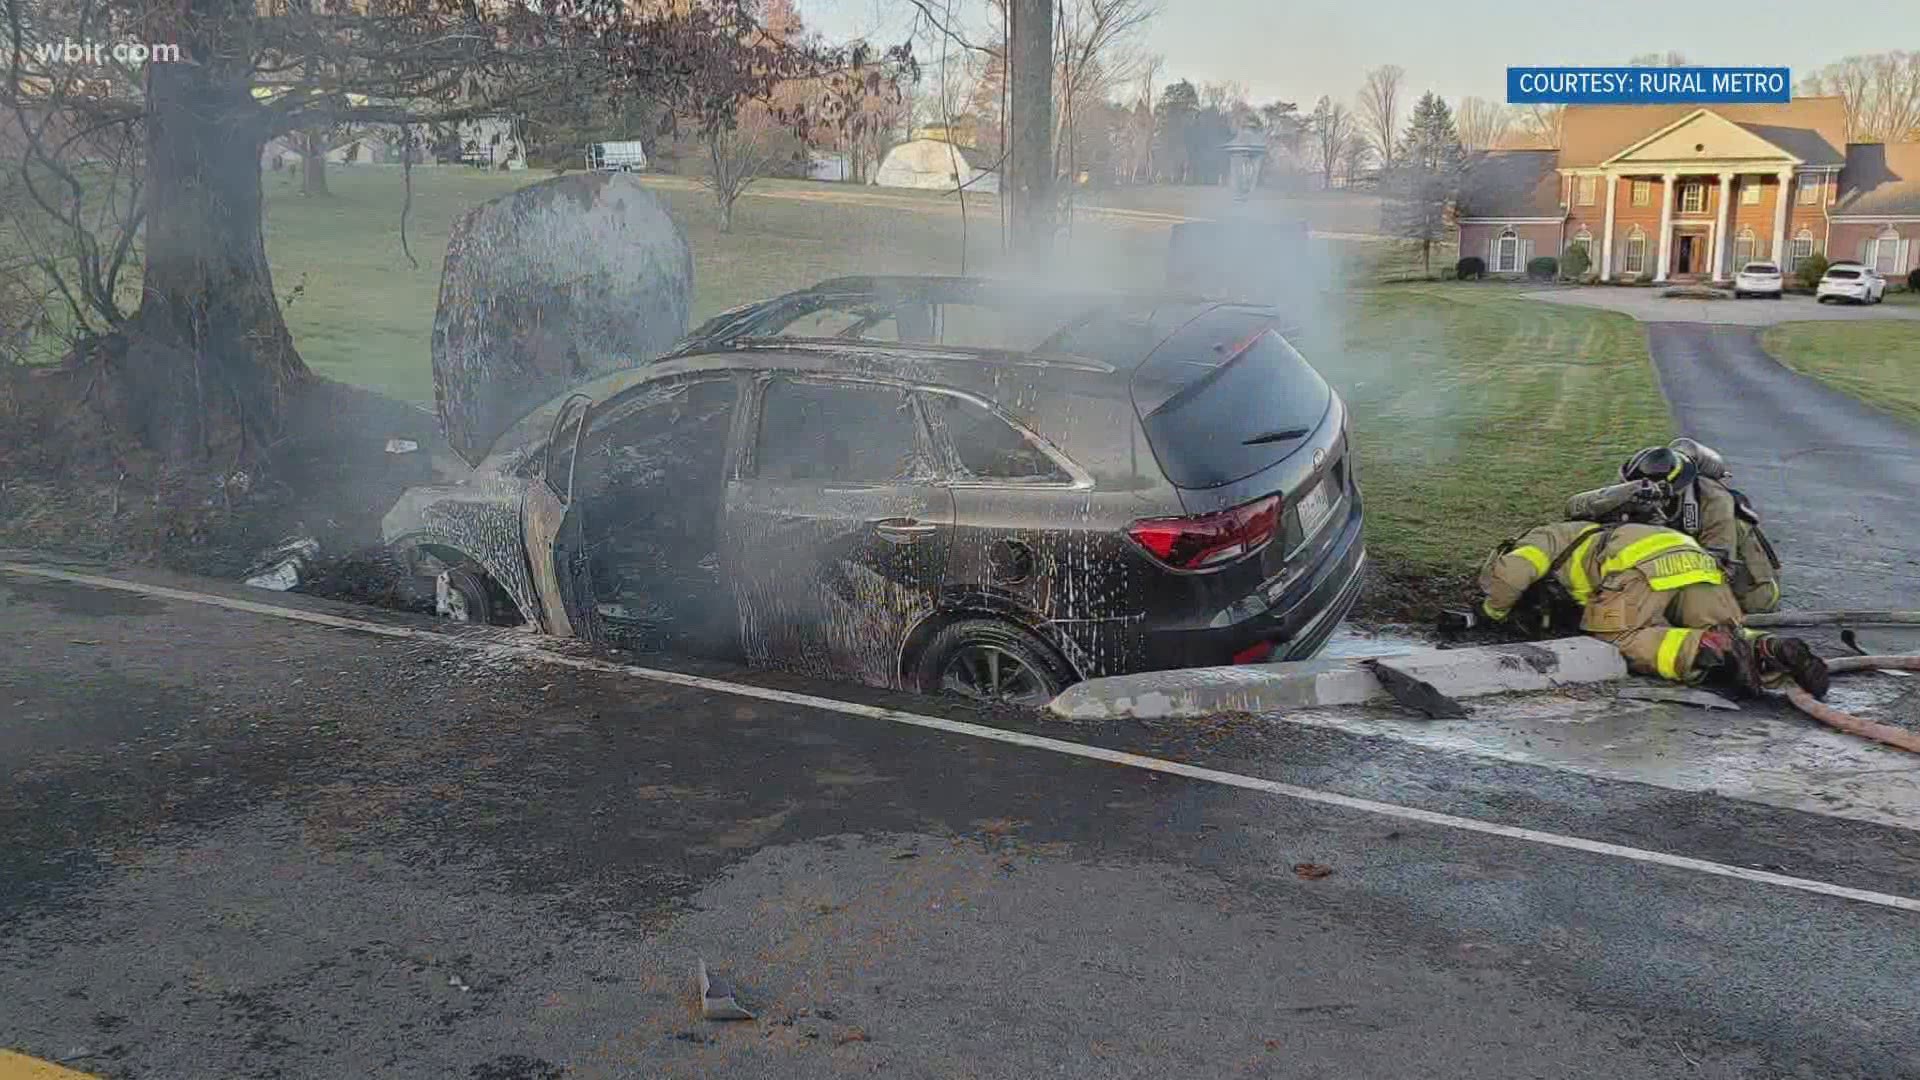 Rural Metro Fire and Knox County Rescue responded to a car crash with a fire in North Knoxville.